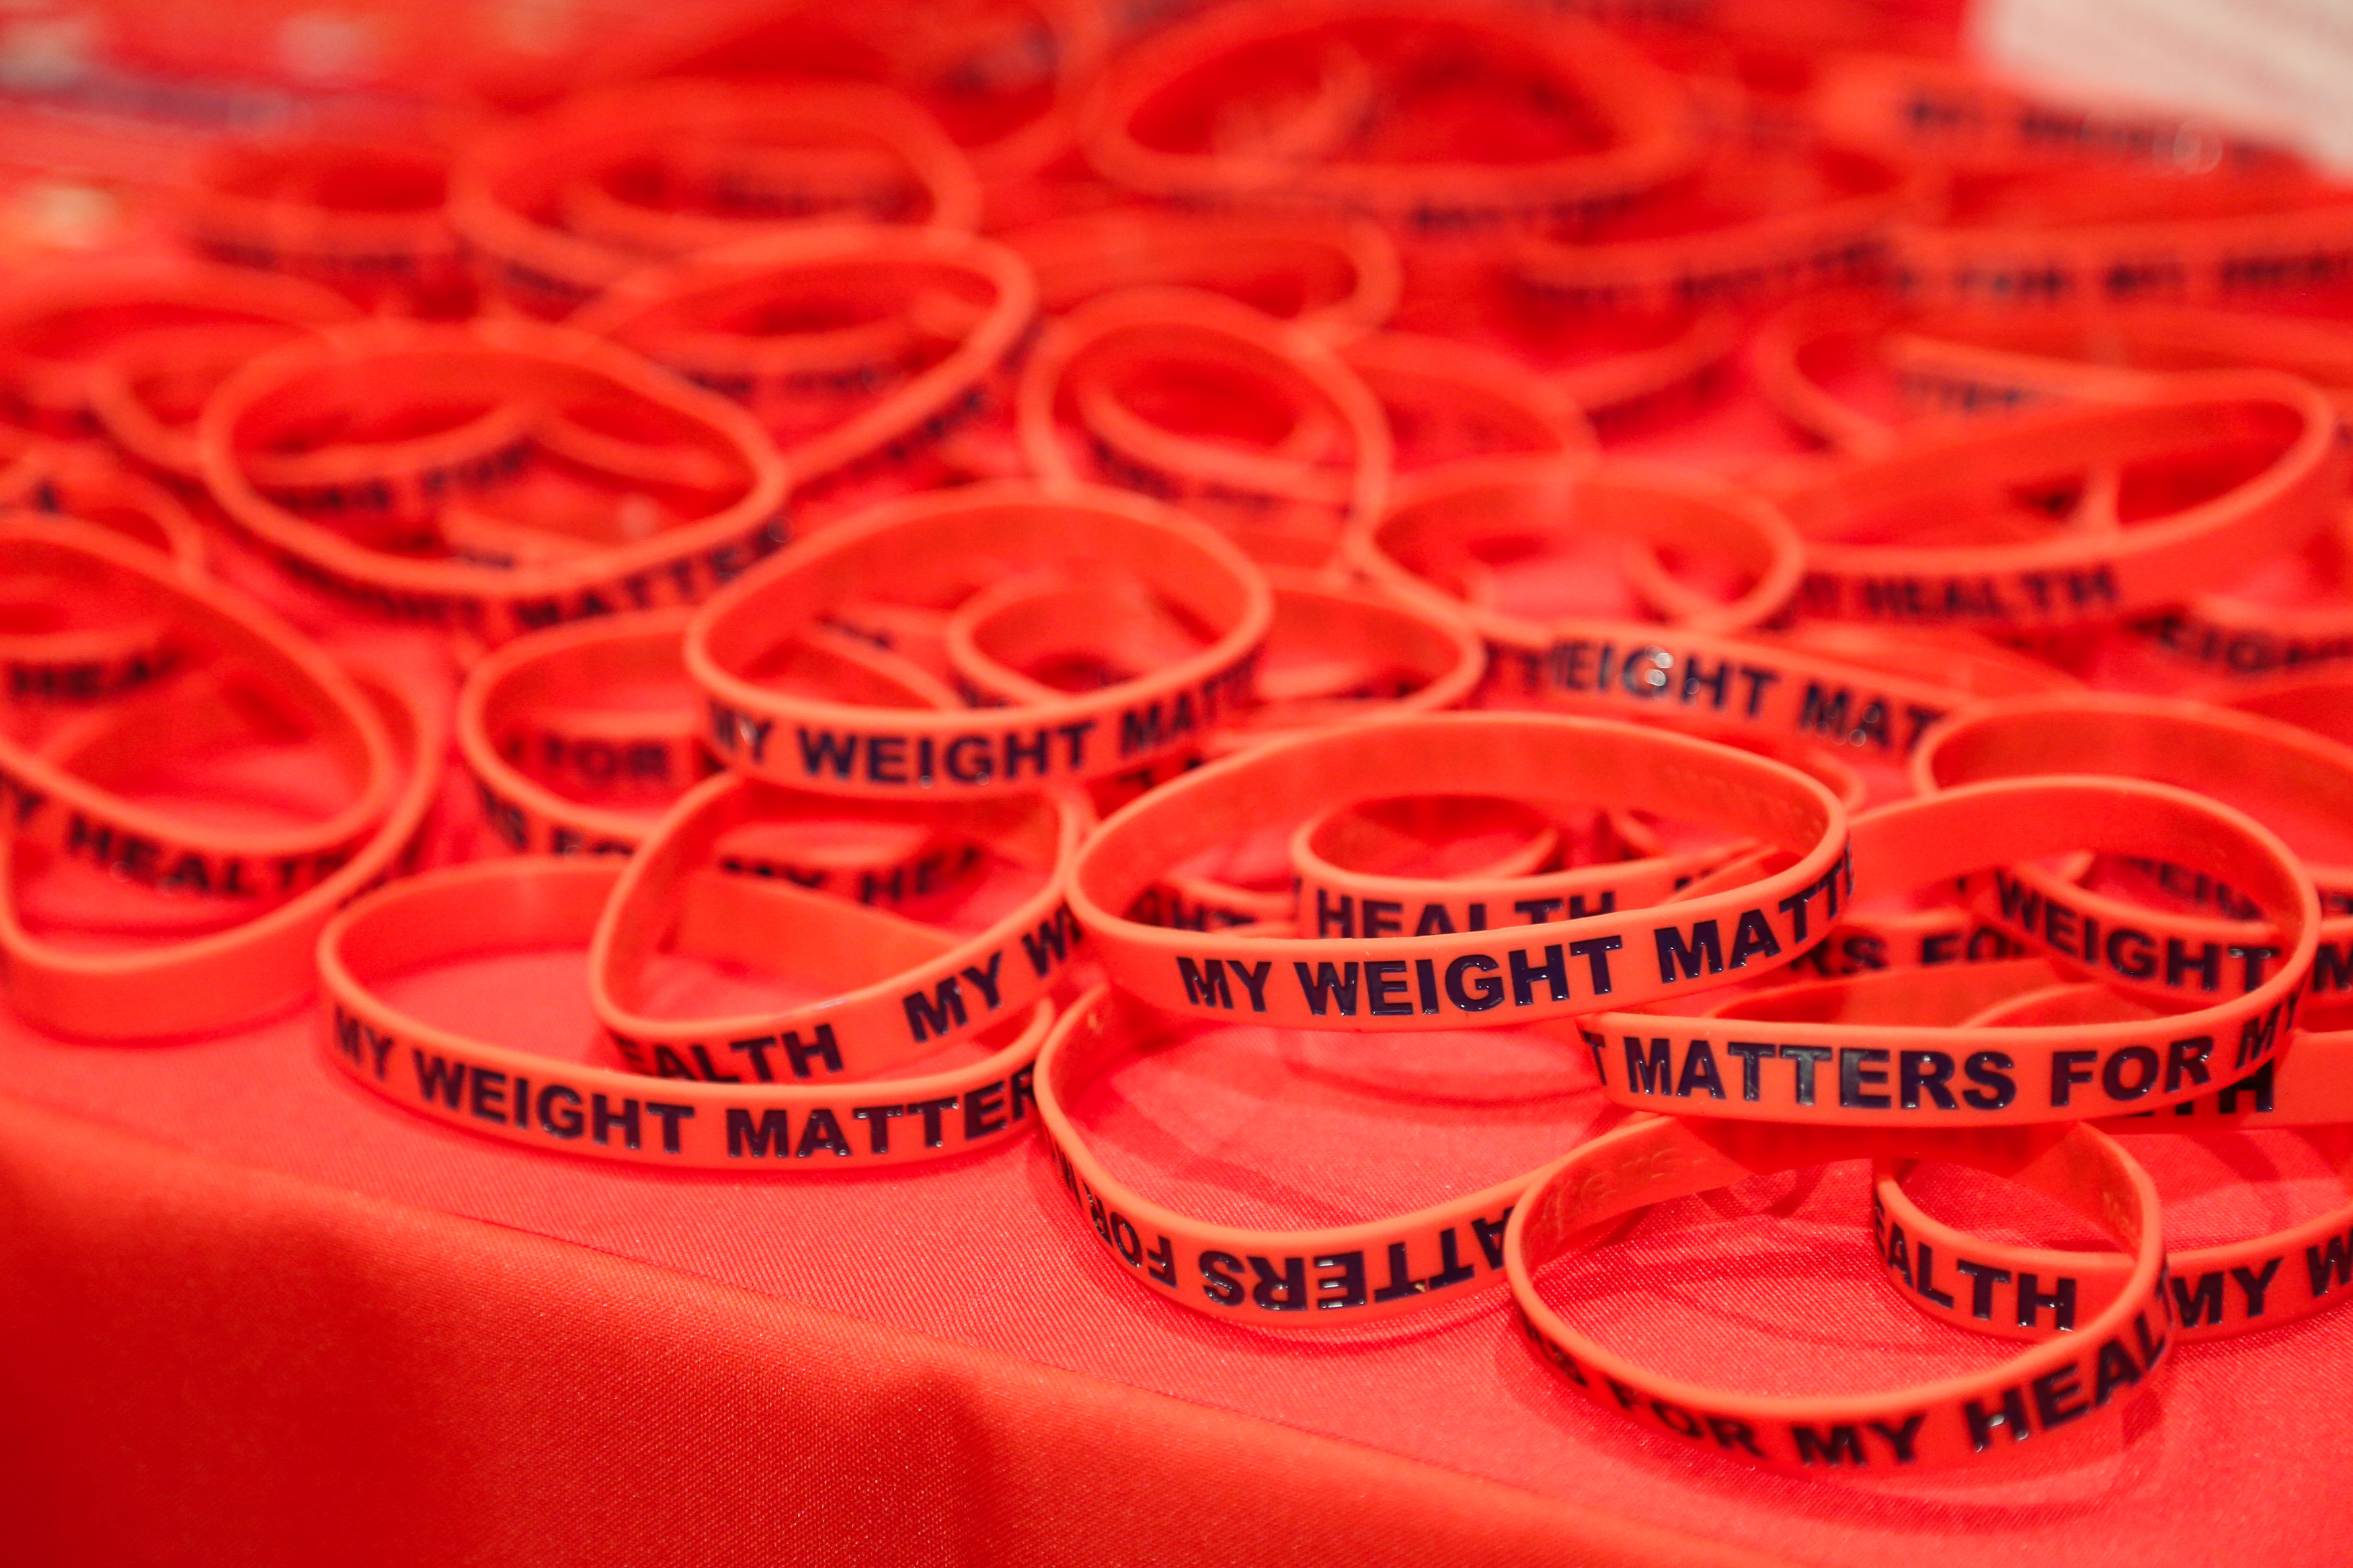 My weight matters for my health bracelets Your Weight Matters